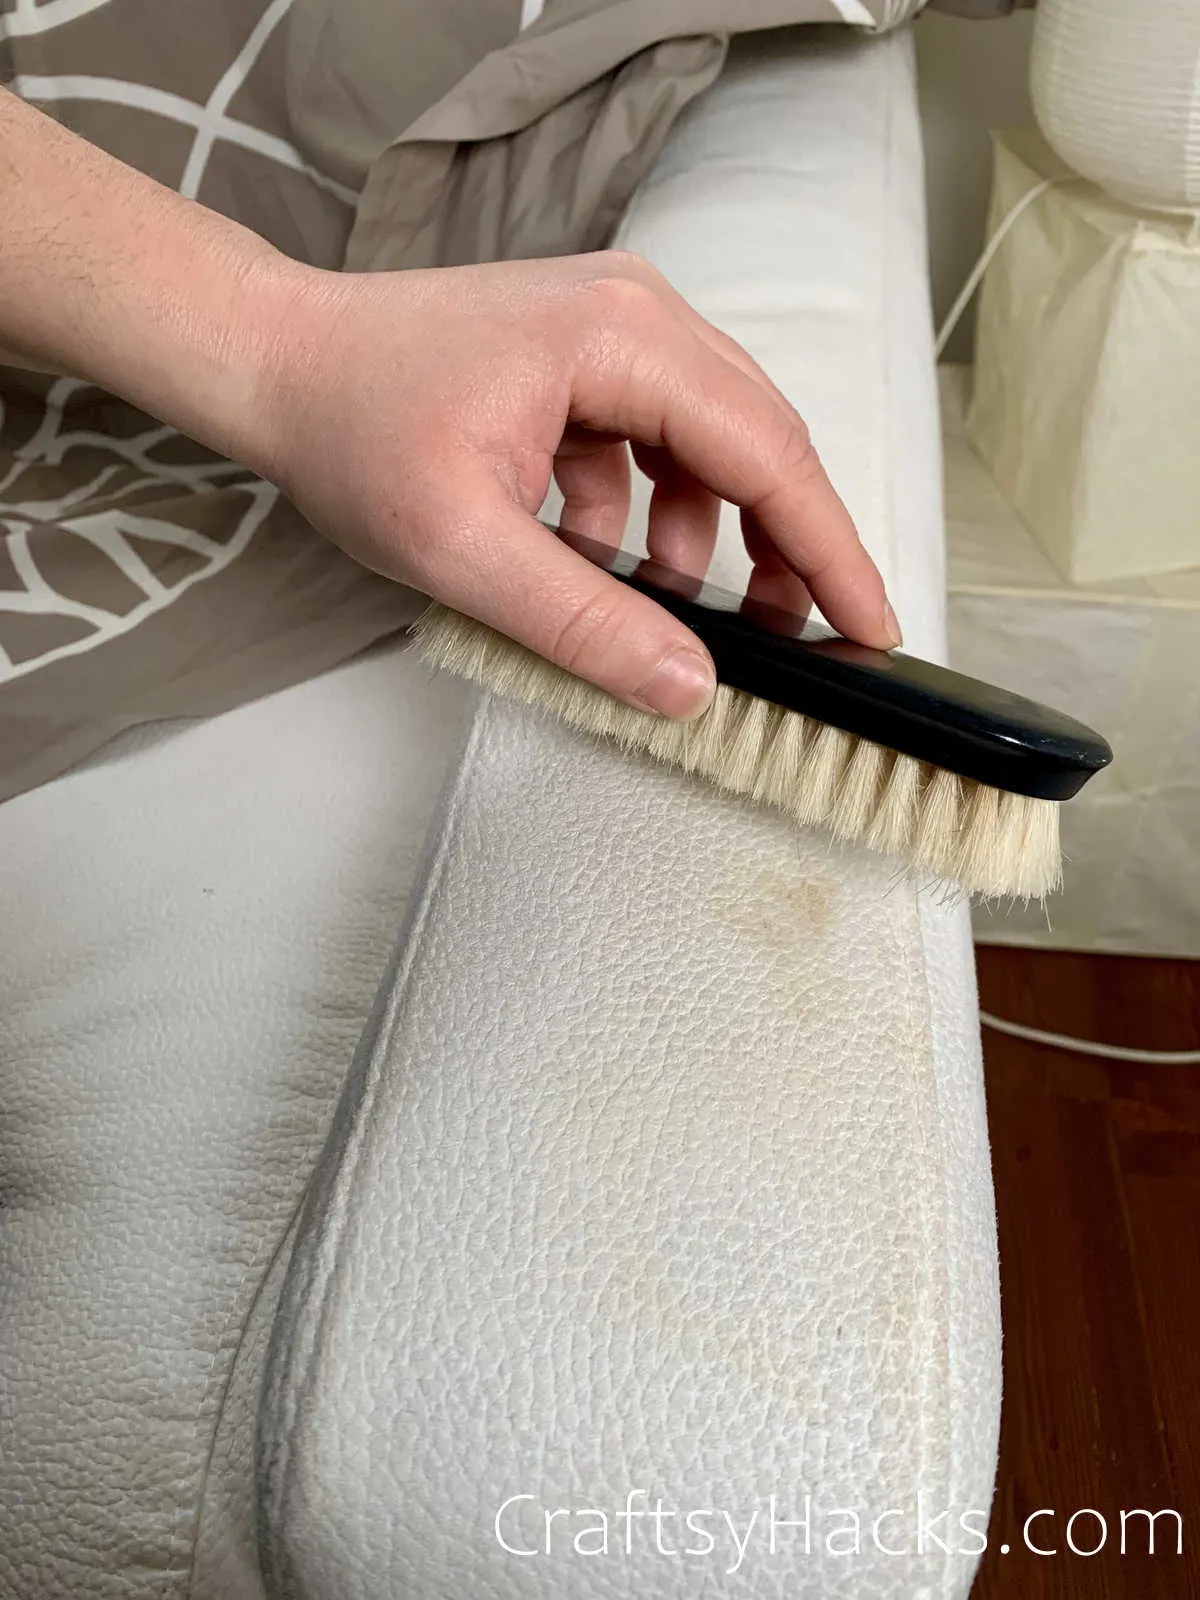 spot clean furniture with a brush and rubbing alcohol